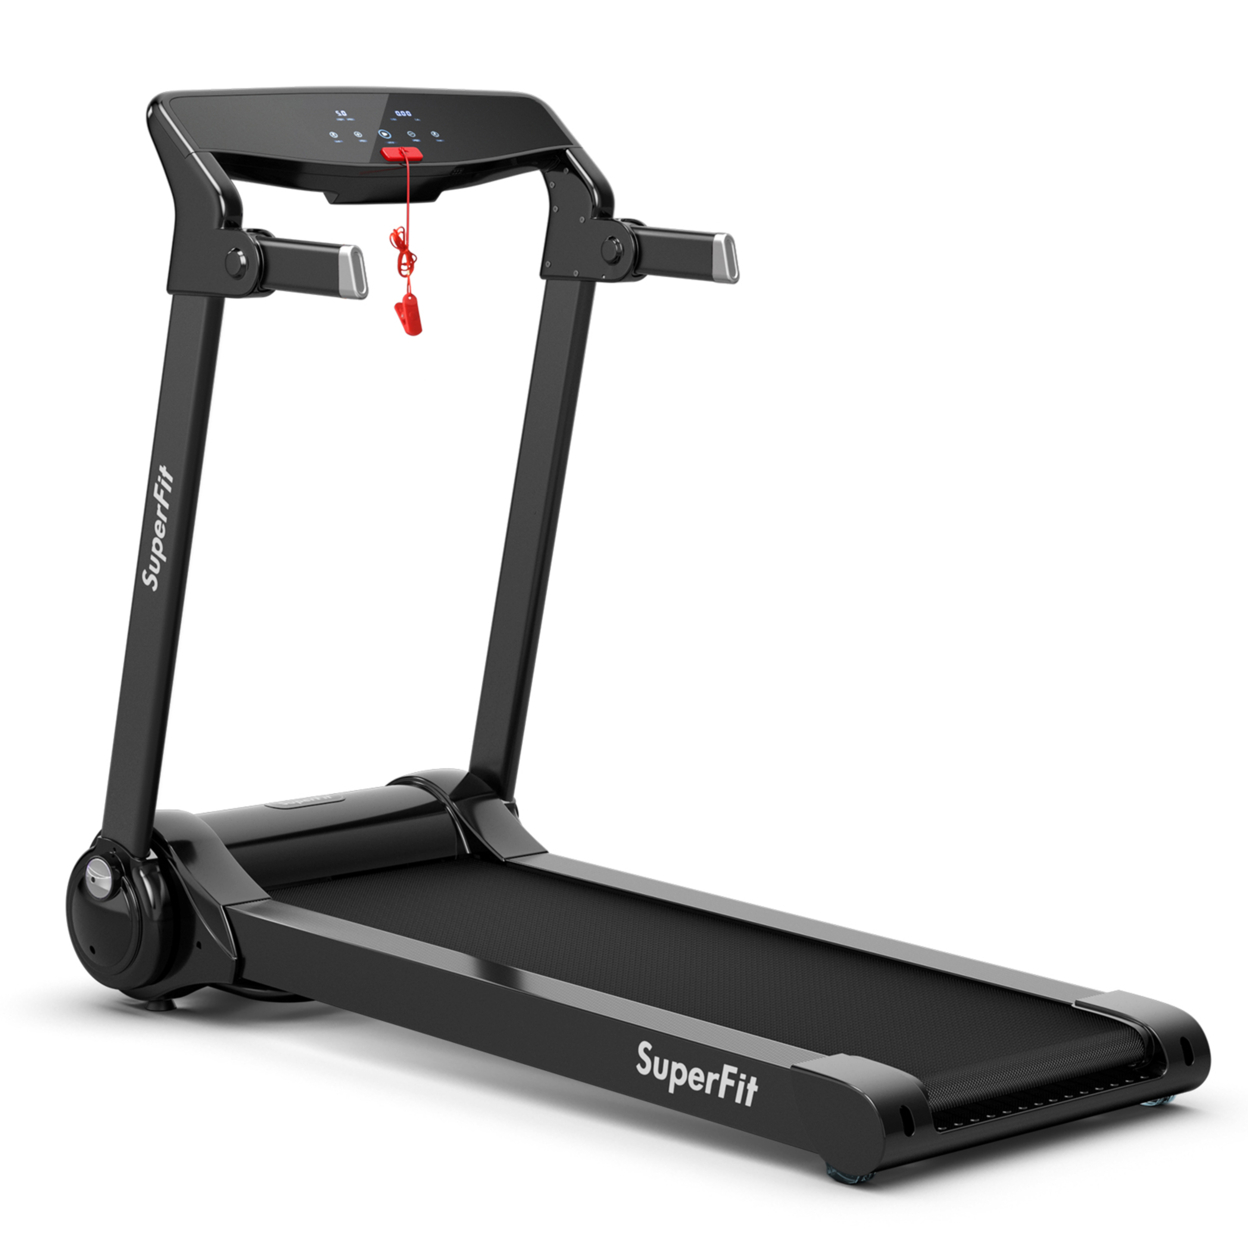 Folding Electric Treadmill 3.0HP Exercise Running Machine W/ App Control - Silver + Black